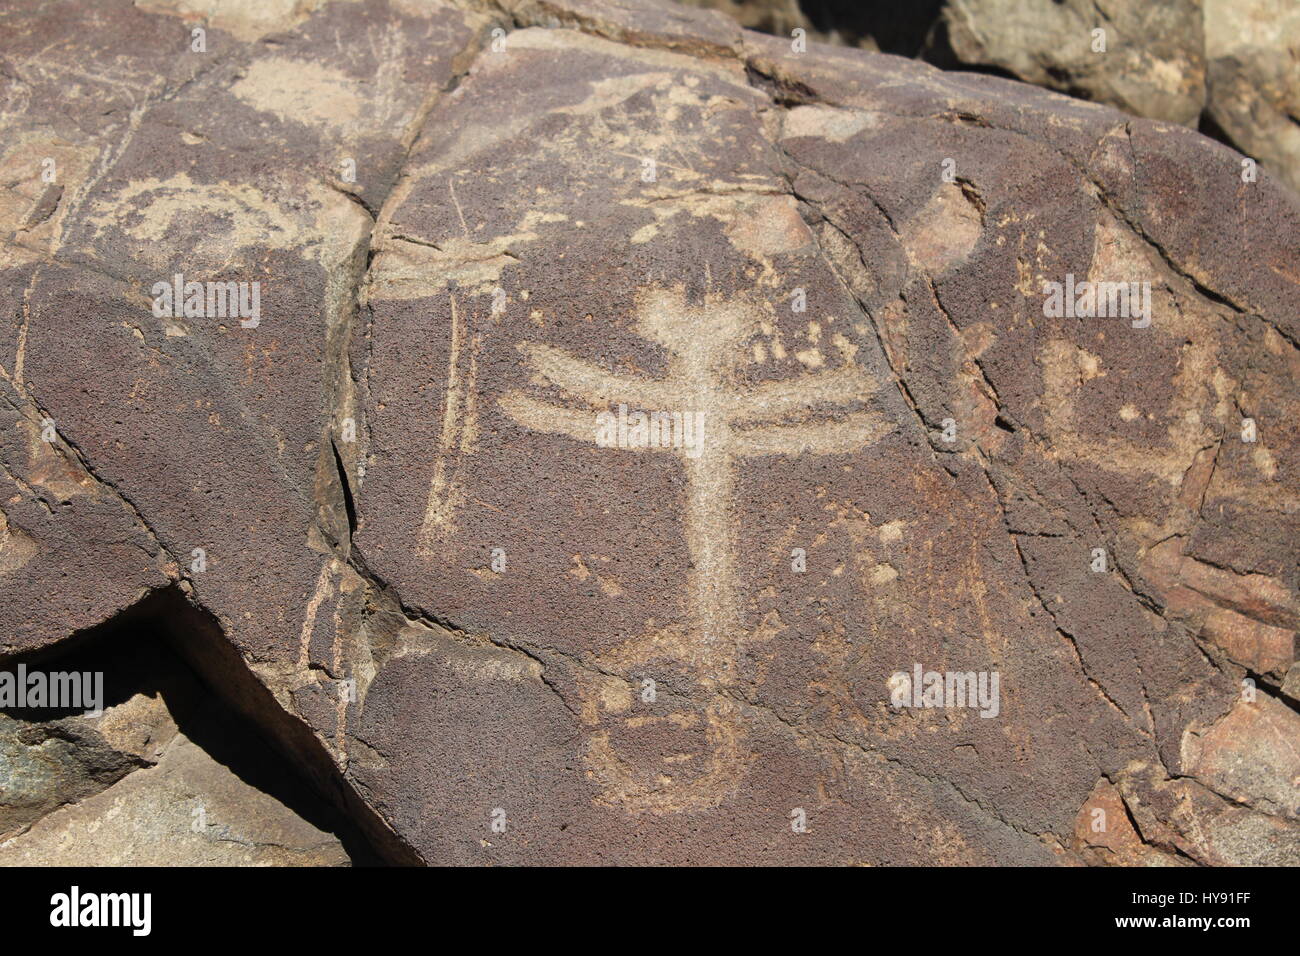 Dragonfly petroglyph, Dragonfly Trail, Gila National Forest, Silver City NM USA Stock Photo